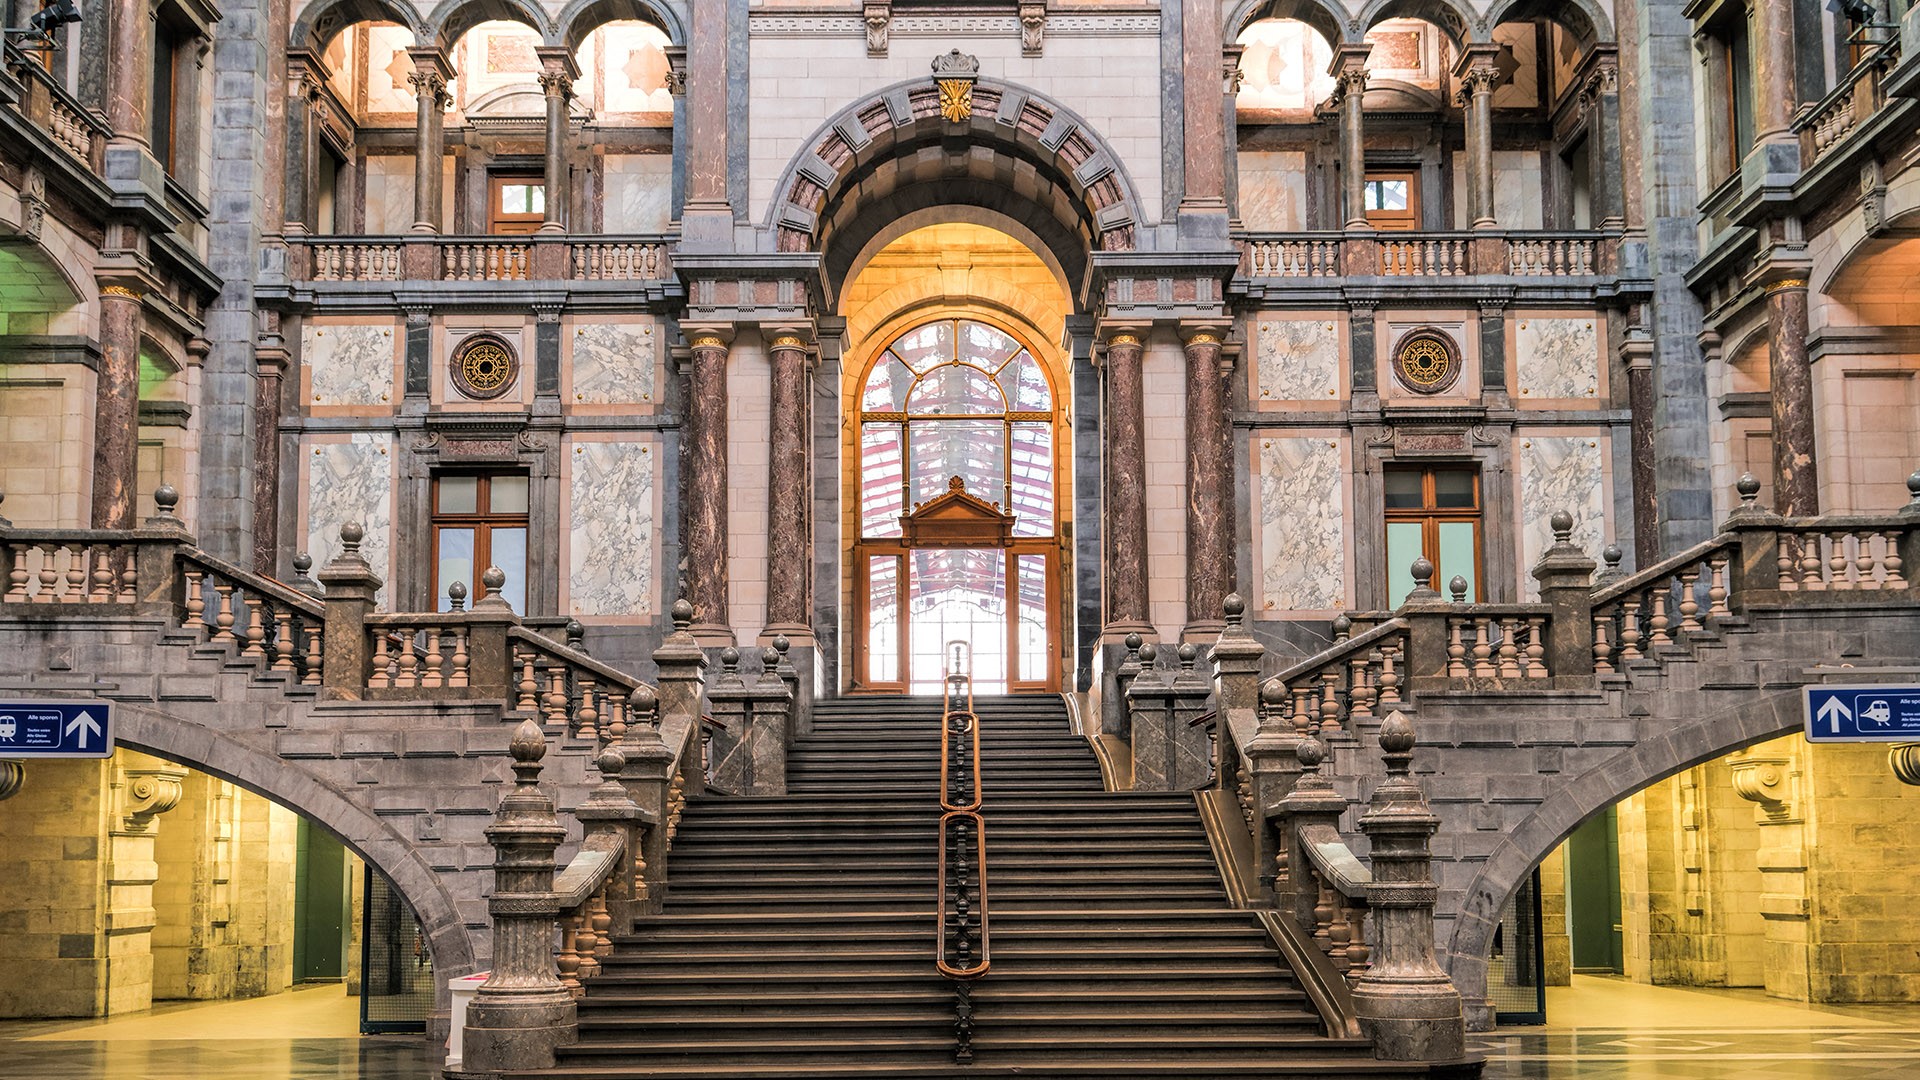 General 1920x1080 building architecture stairs old building Antwerp train station Belgium arch